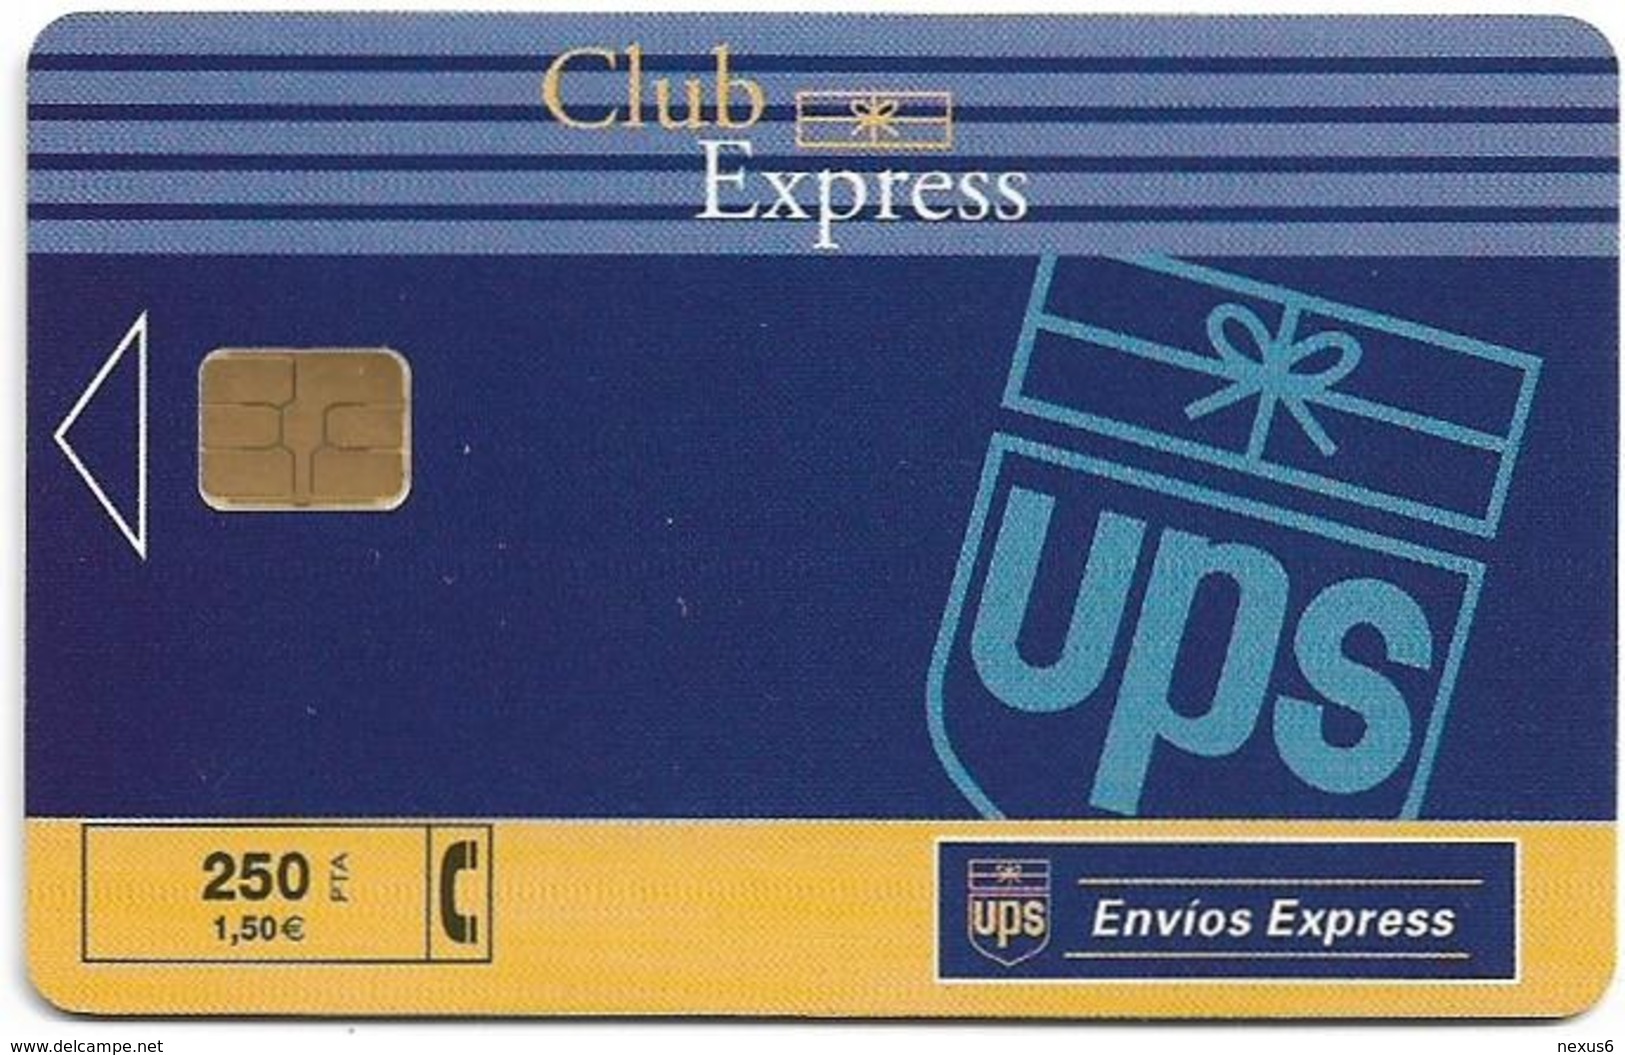 Spain - Telefonica - Club Express UPS - P-372 - 02.1999, 5.500ex, Used - Private Issues